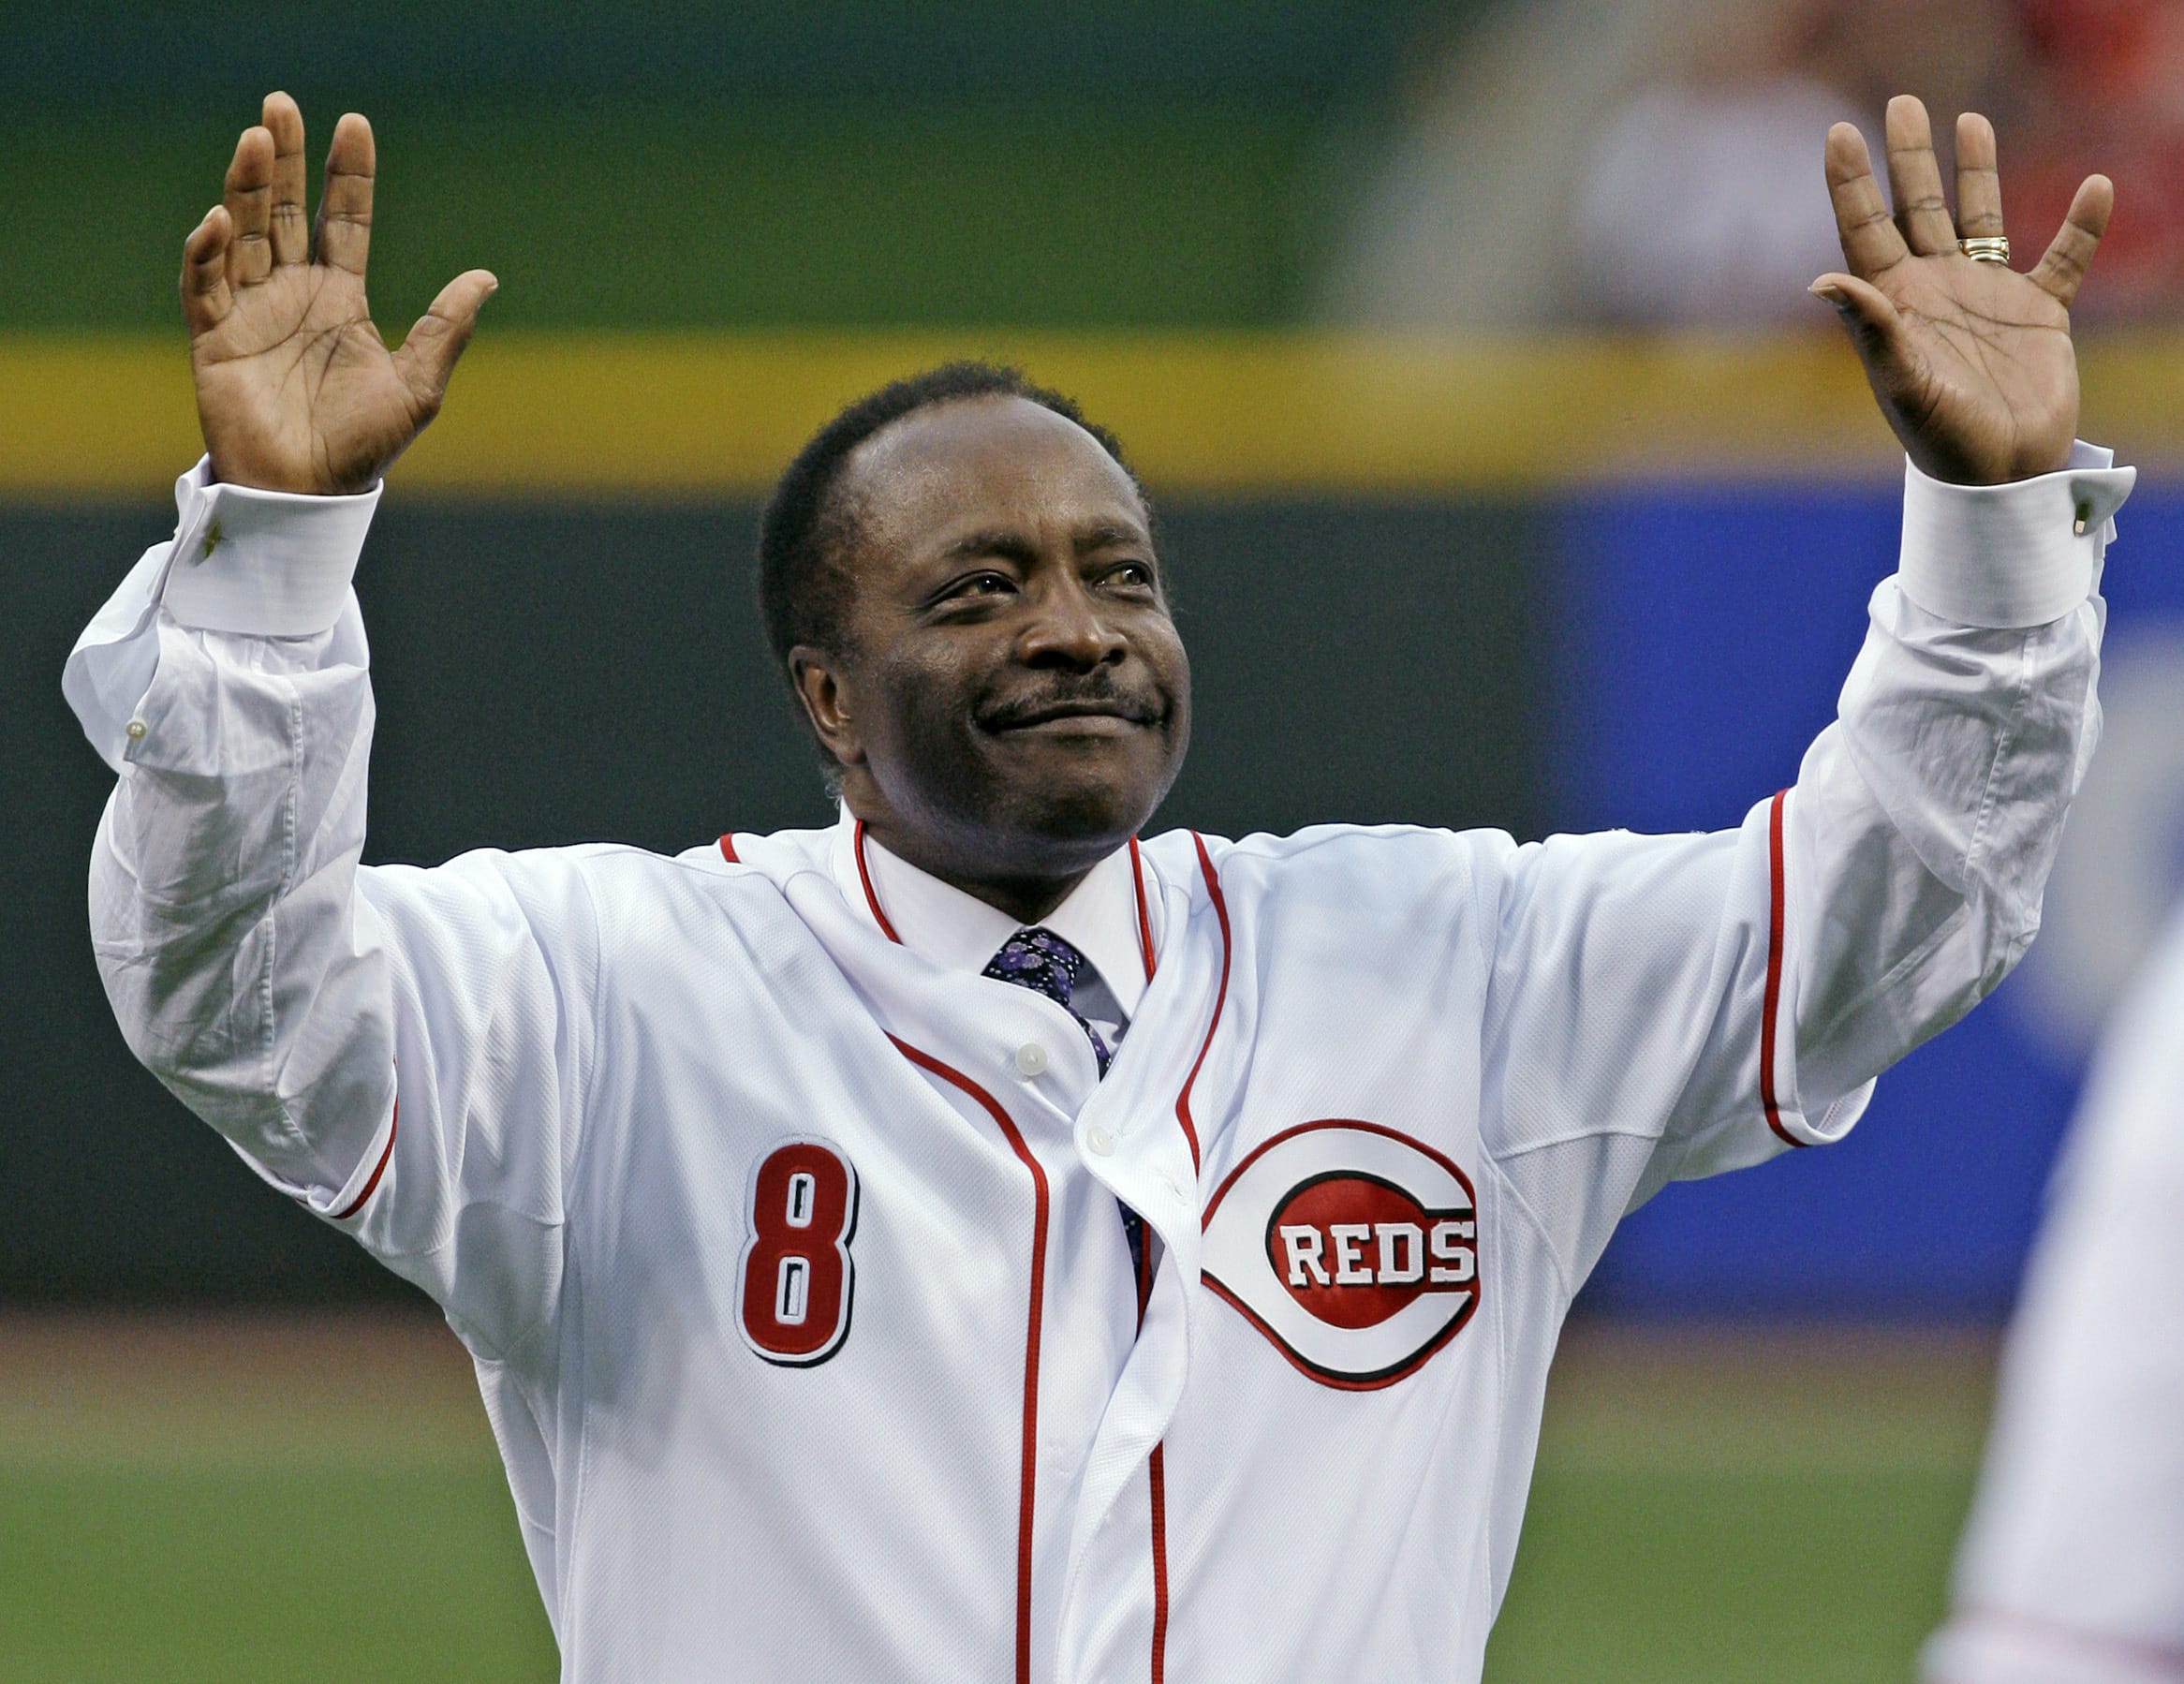 Cincinnati Reds Hall of Fame second baseman Joe Morgan acknowledges the crowd after throwing out a ceremonial first pitch in 2010. A family spokesman says Morgan died at his home Sunday, Oct. 11, 2020, in Danville, Calif. He was 77.